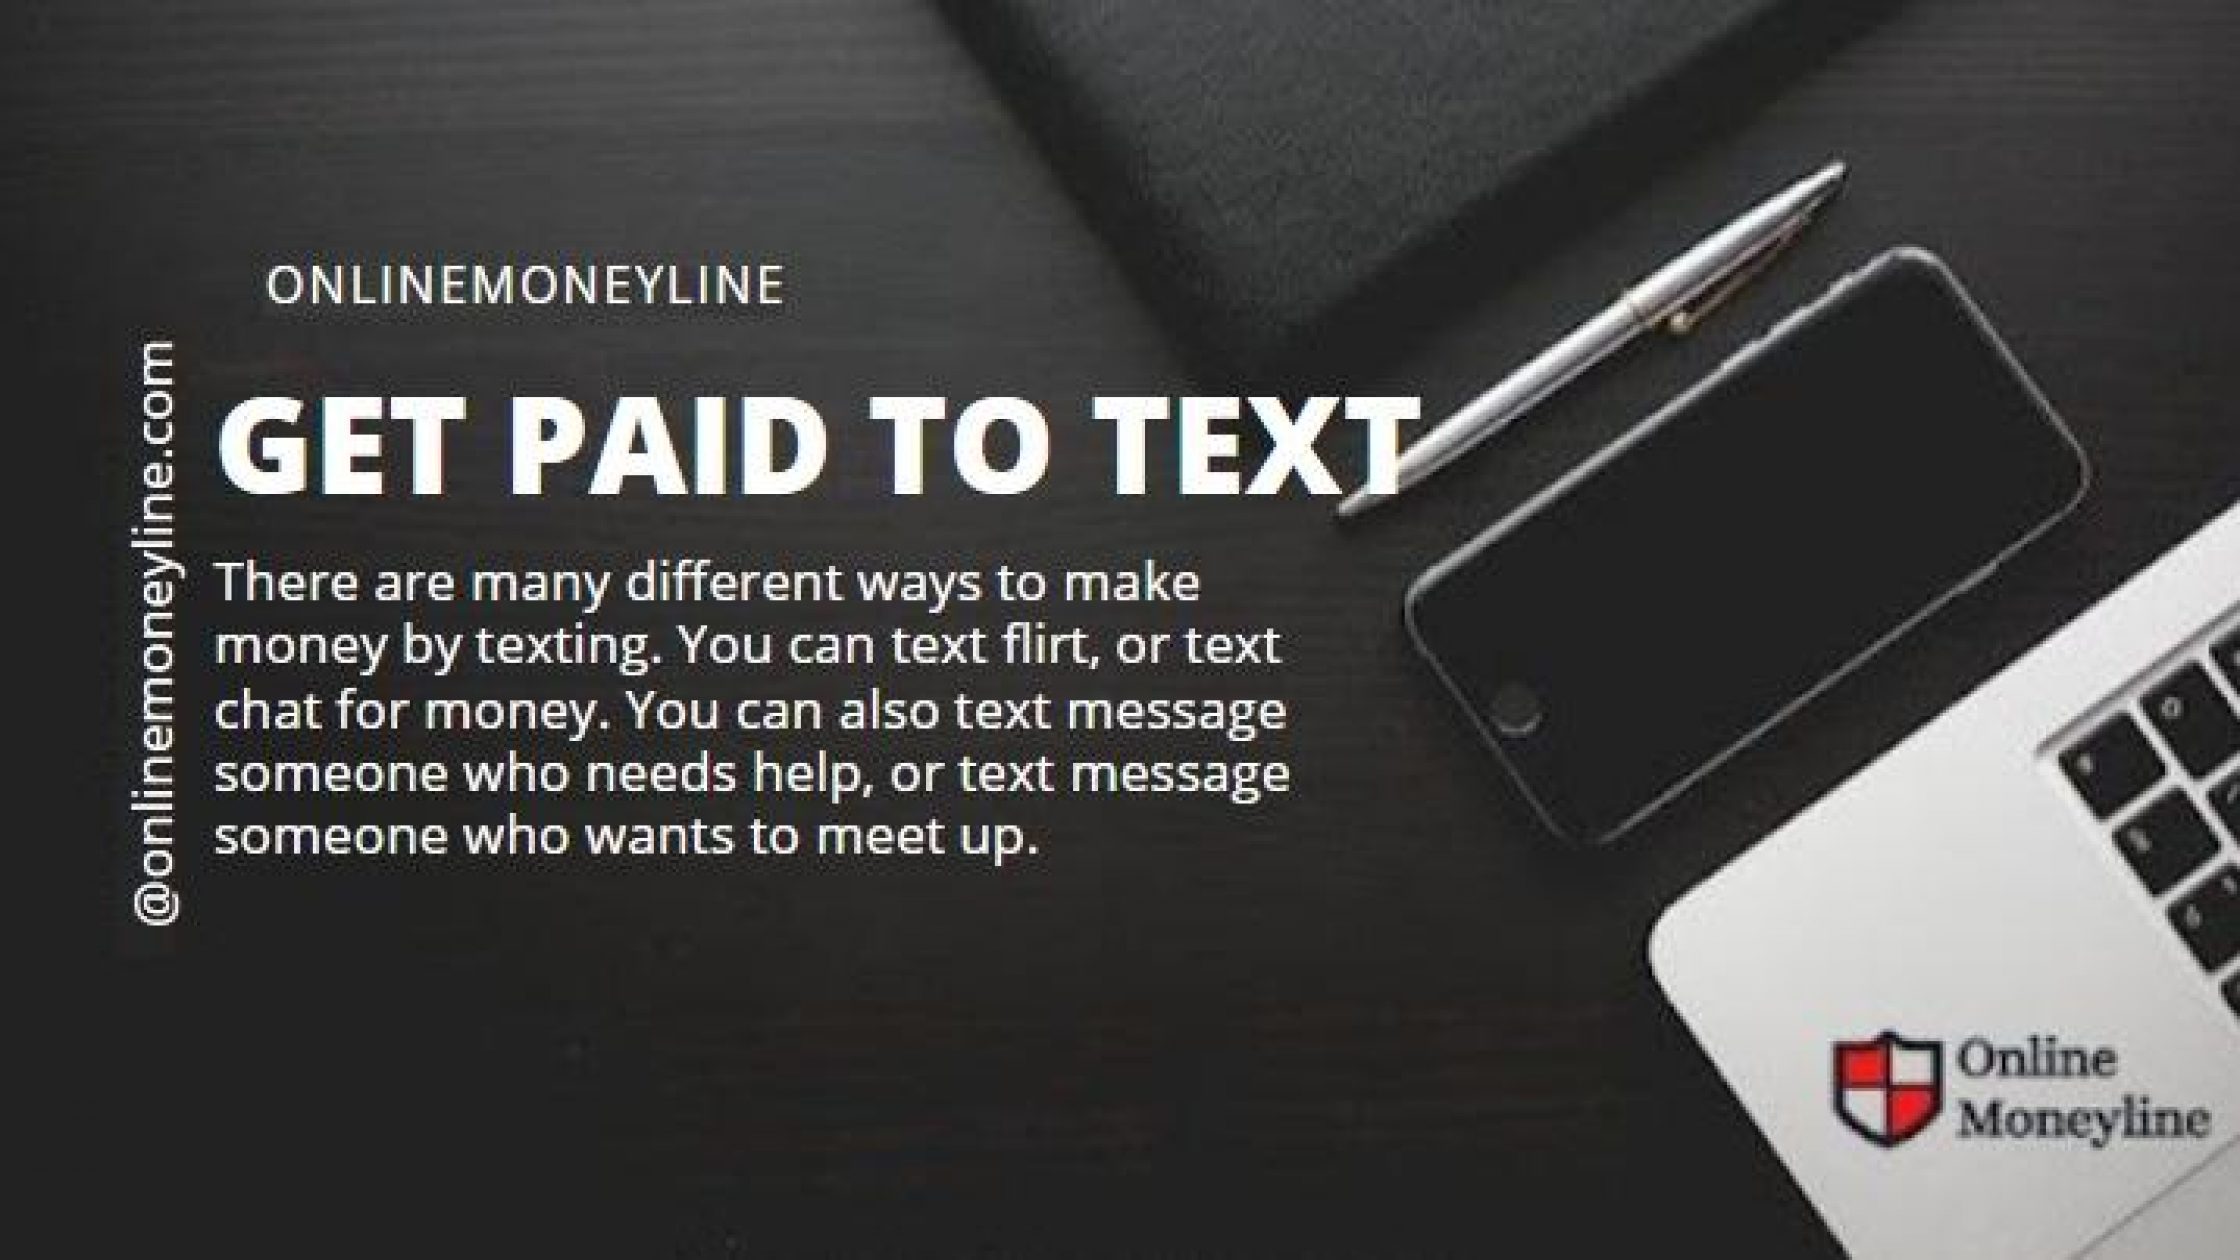 Get Paid Po Text